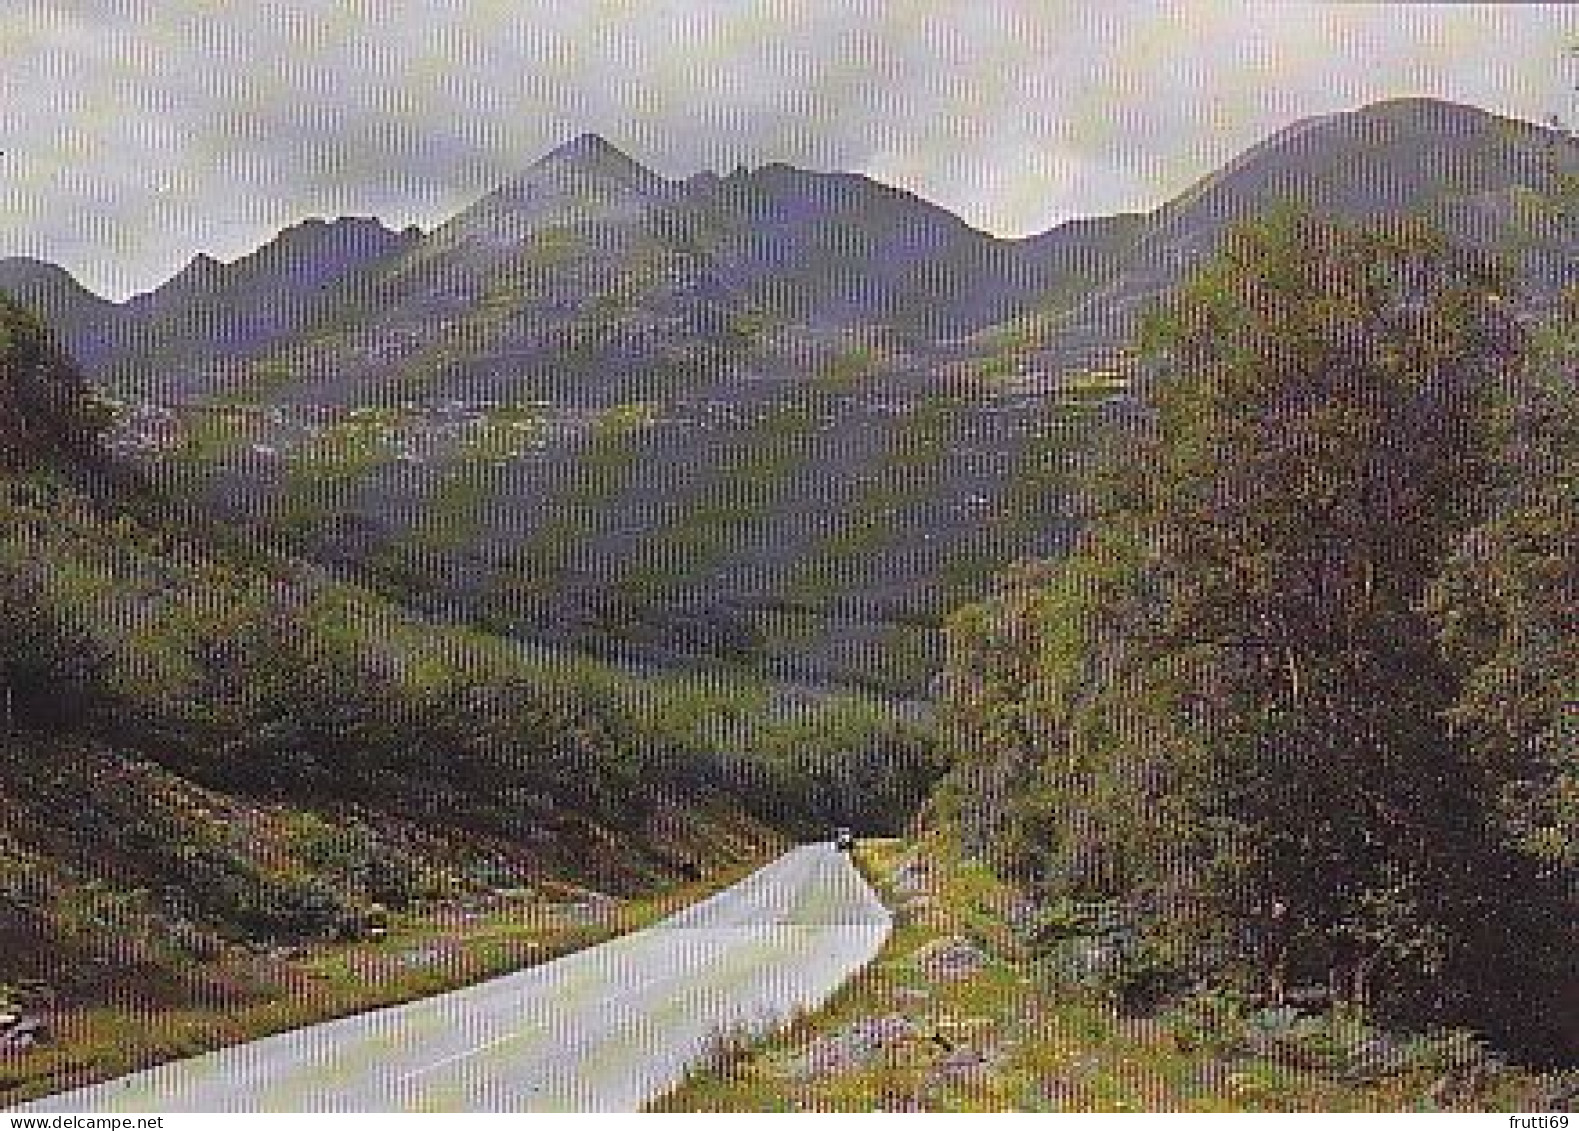 AK 173535 SCOTLAND - The An Teallach Range Of Mountains - Ross-shire - Ross & Cromarty